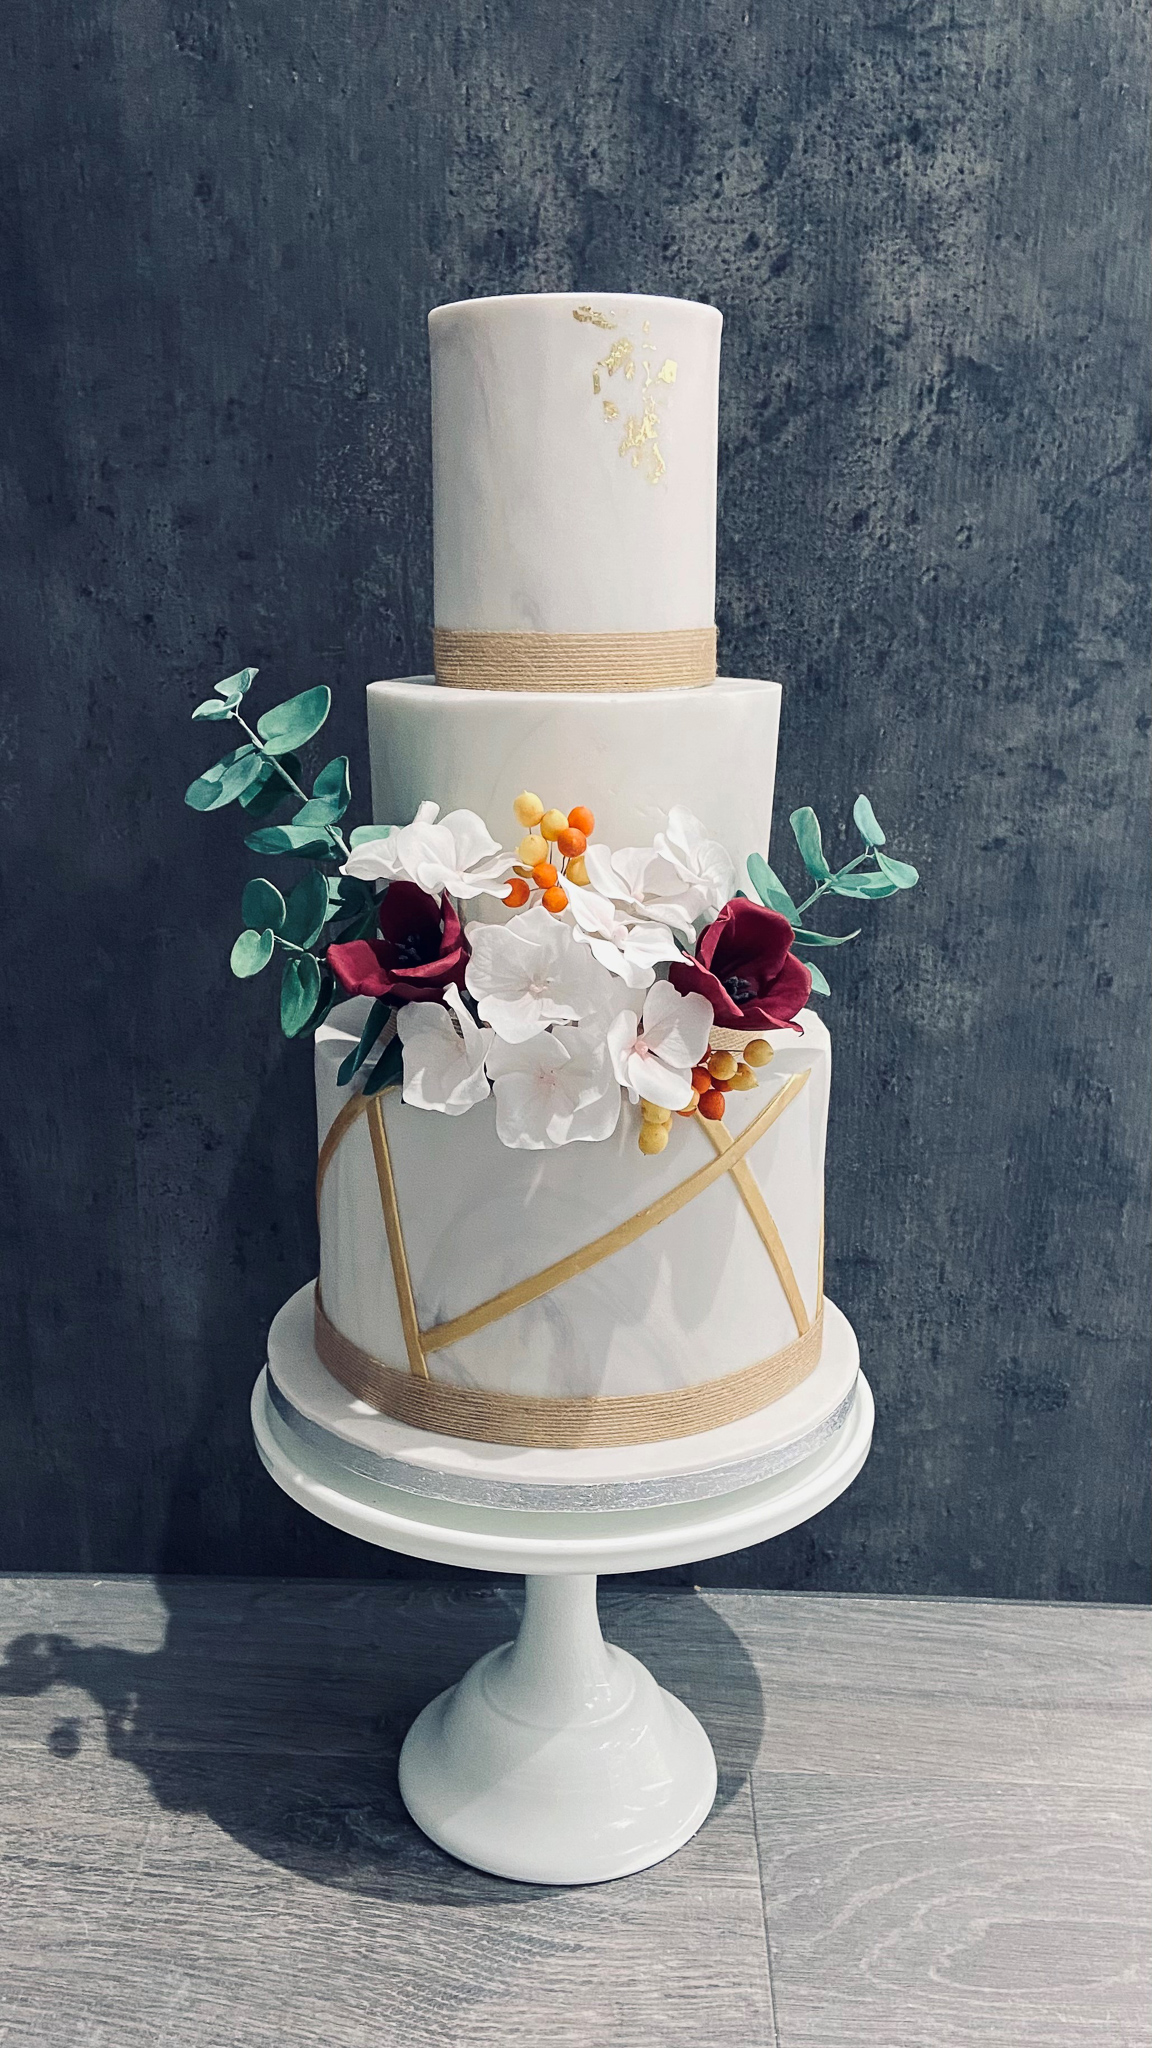 Marbled three-tier wedding cake with gold geometric design and sugar flowers